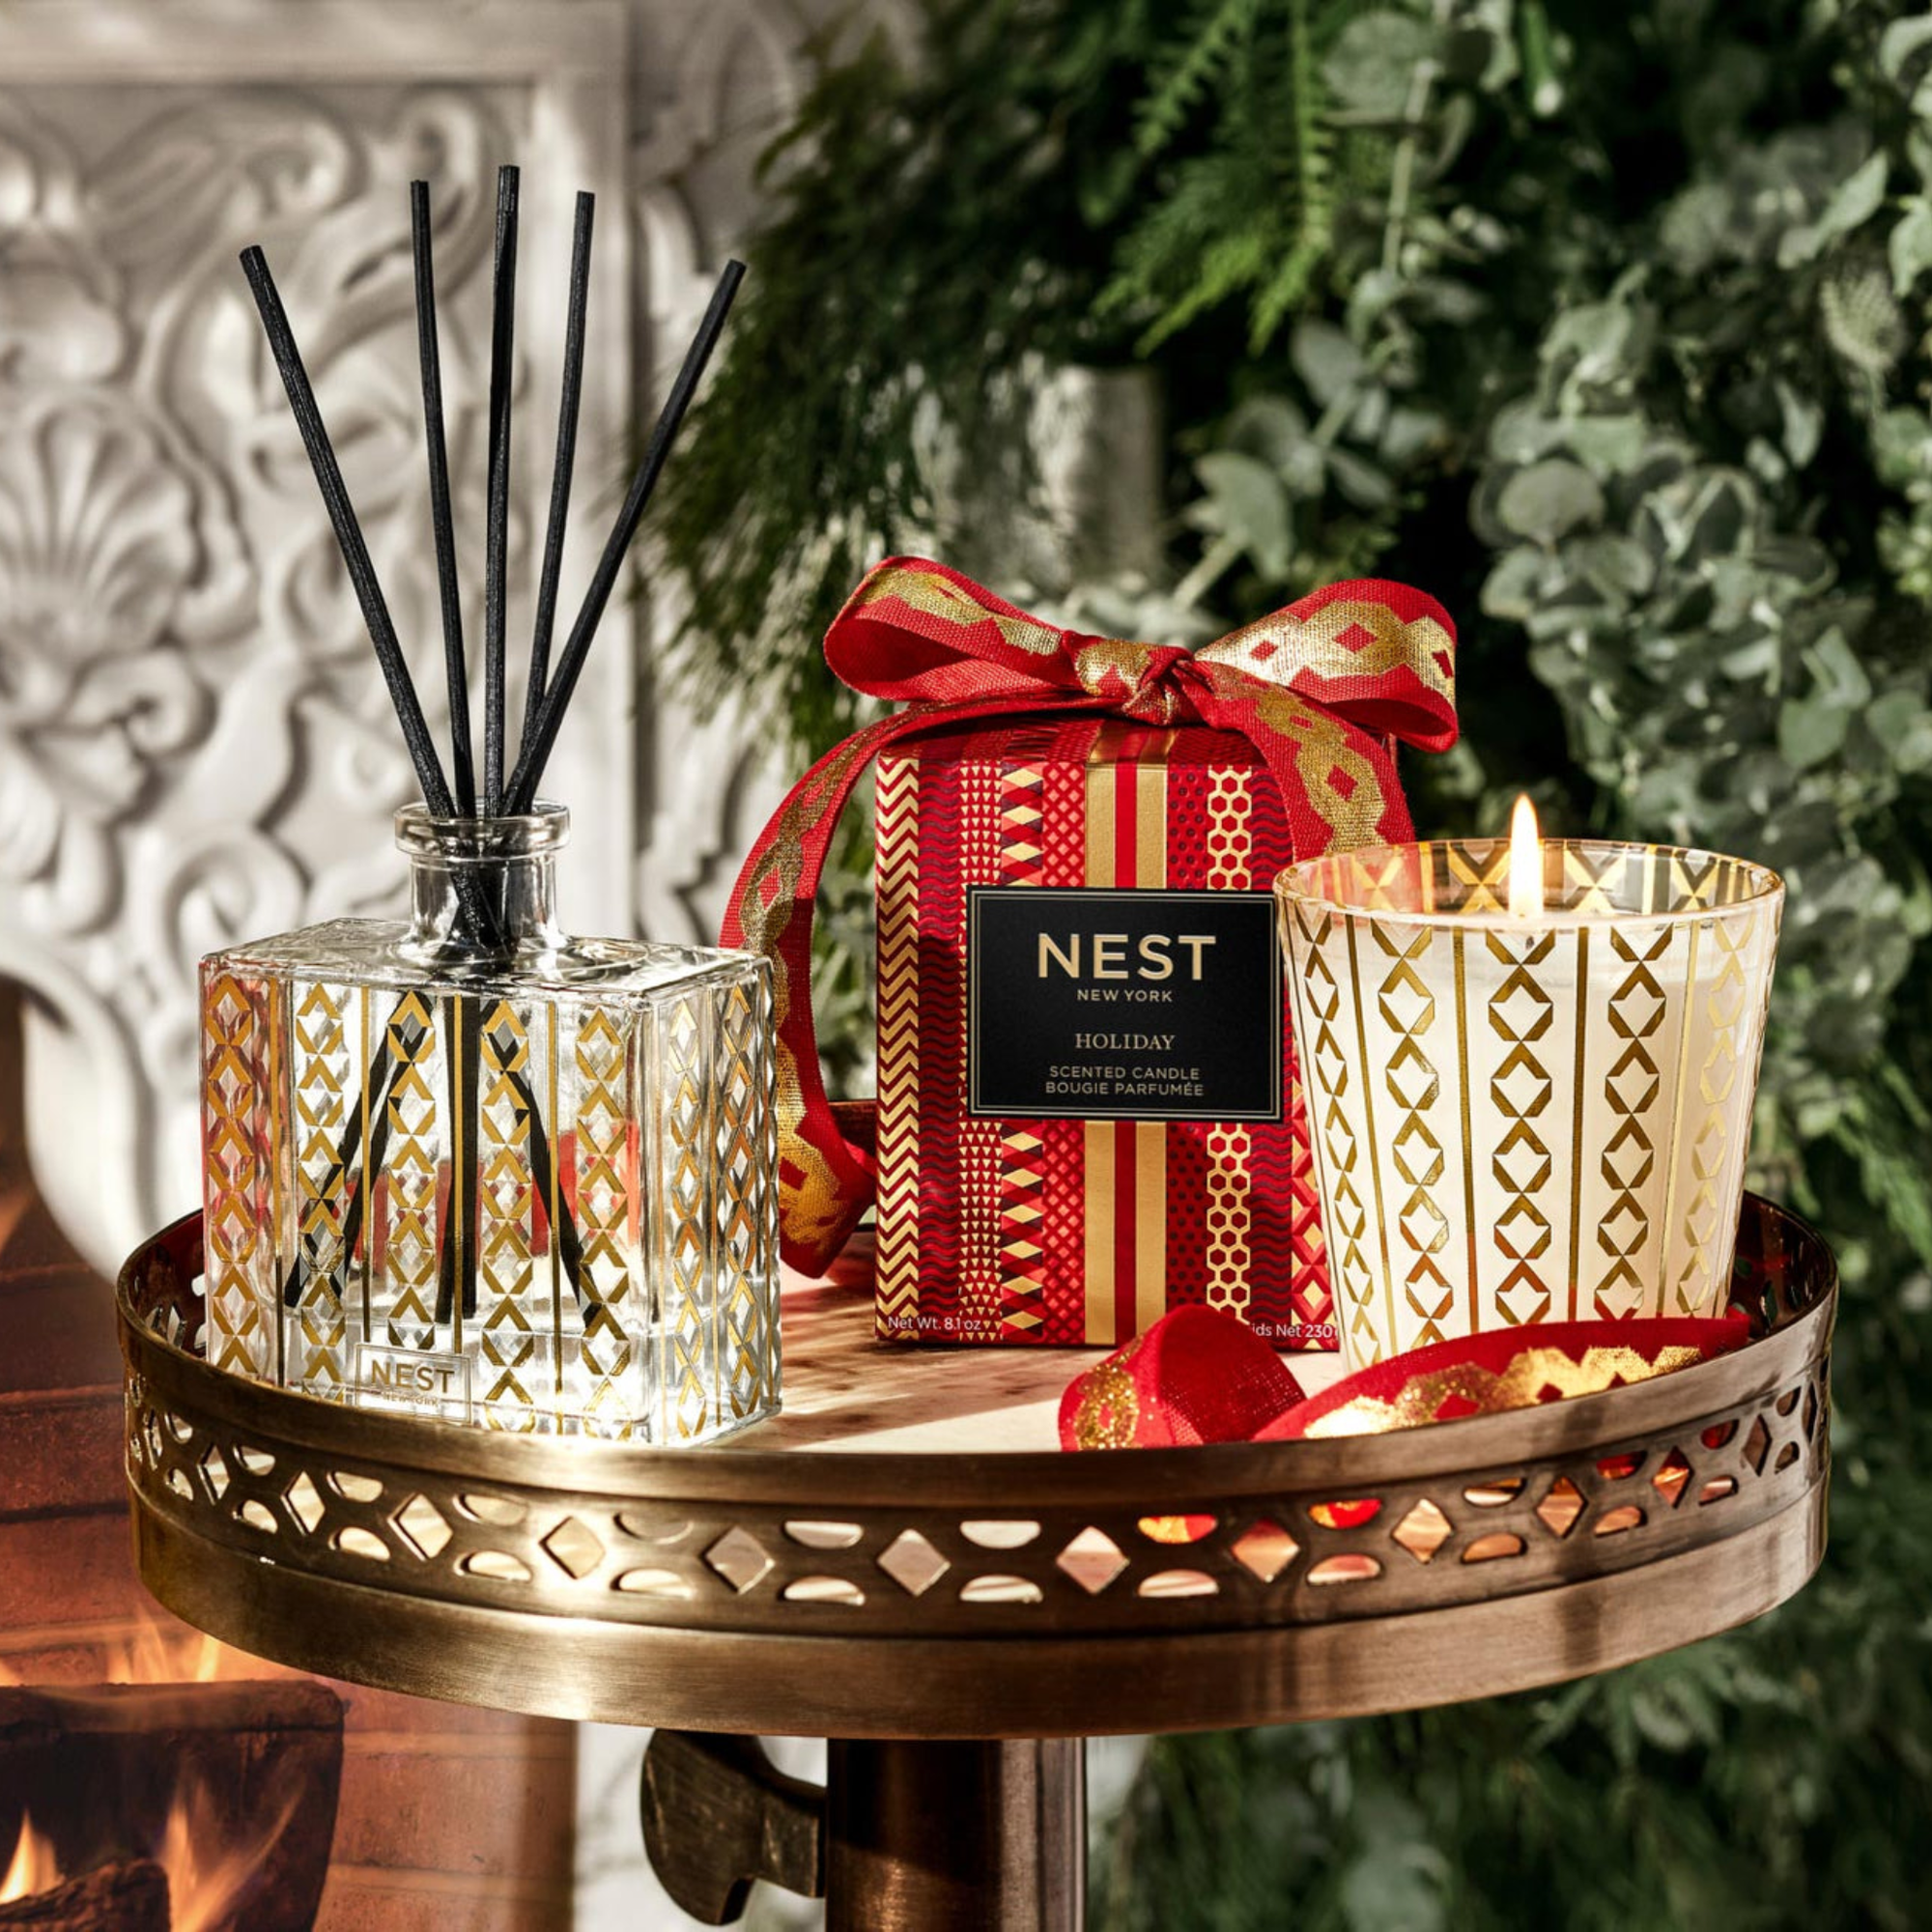 Nest New York Holiday Reed Diffuser Lifestyle with Classic Candle and Box